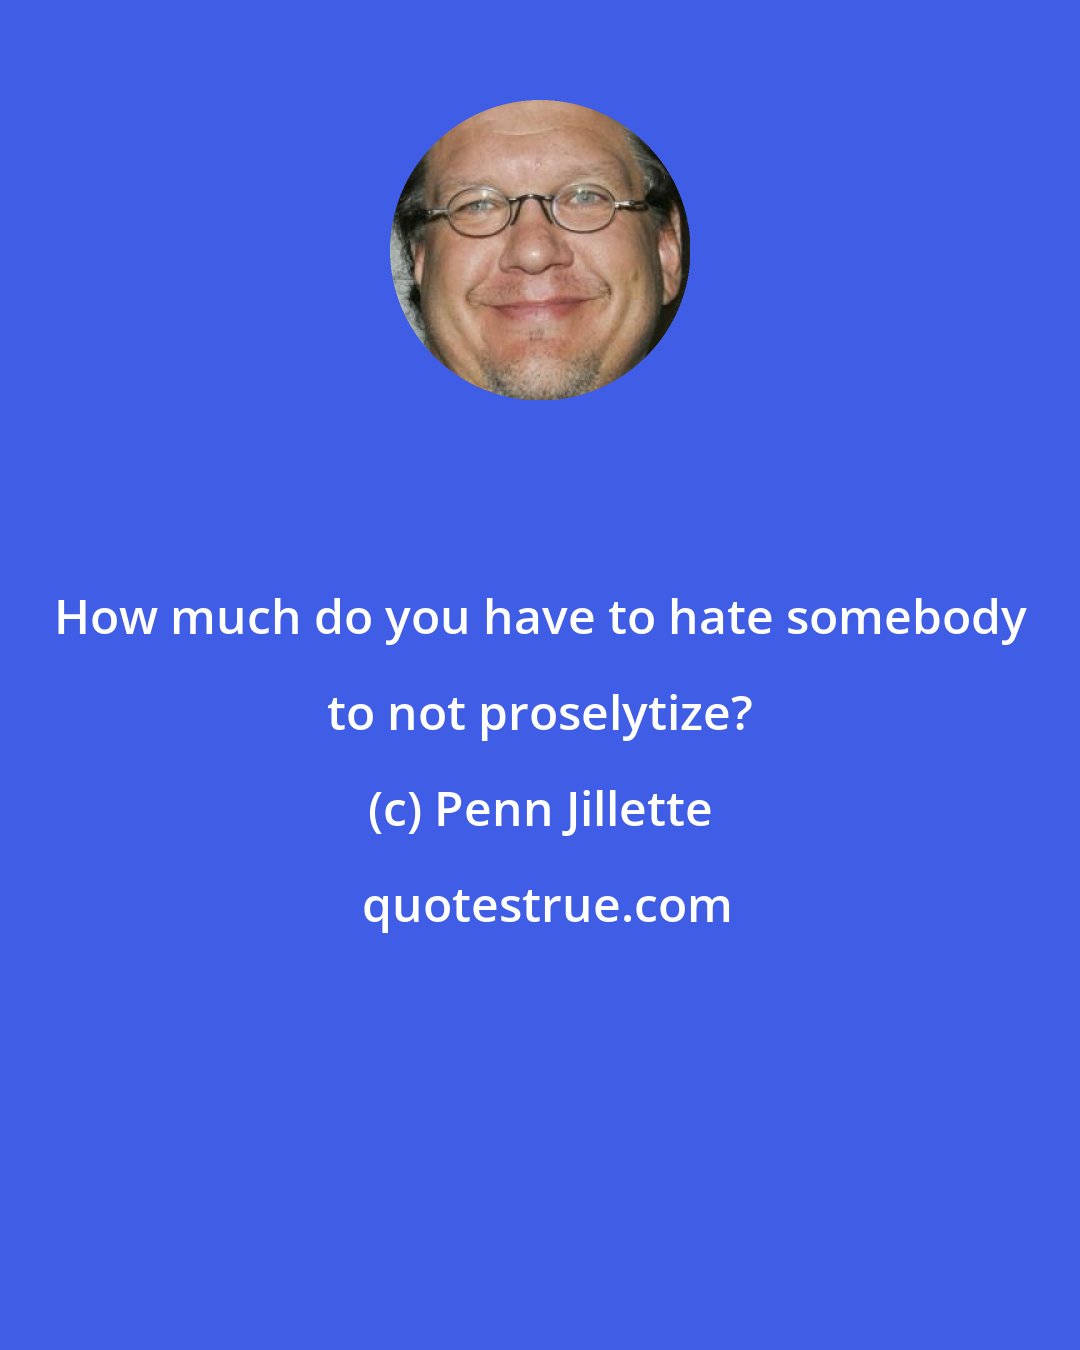 Penn Jillette: How much do you have to hate somebody to not proselytize?